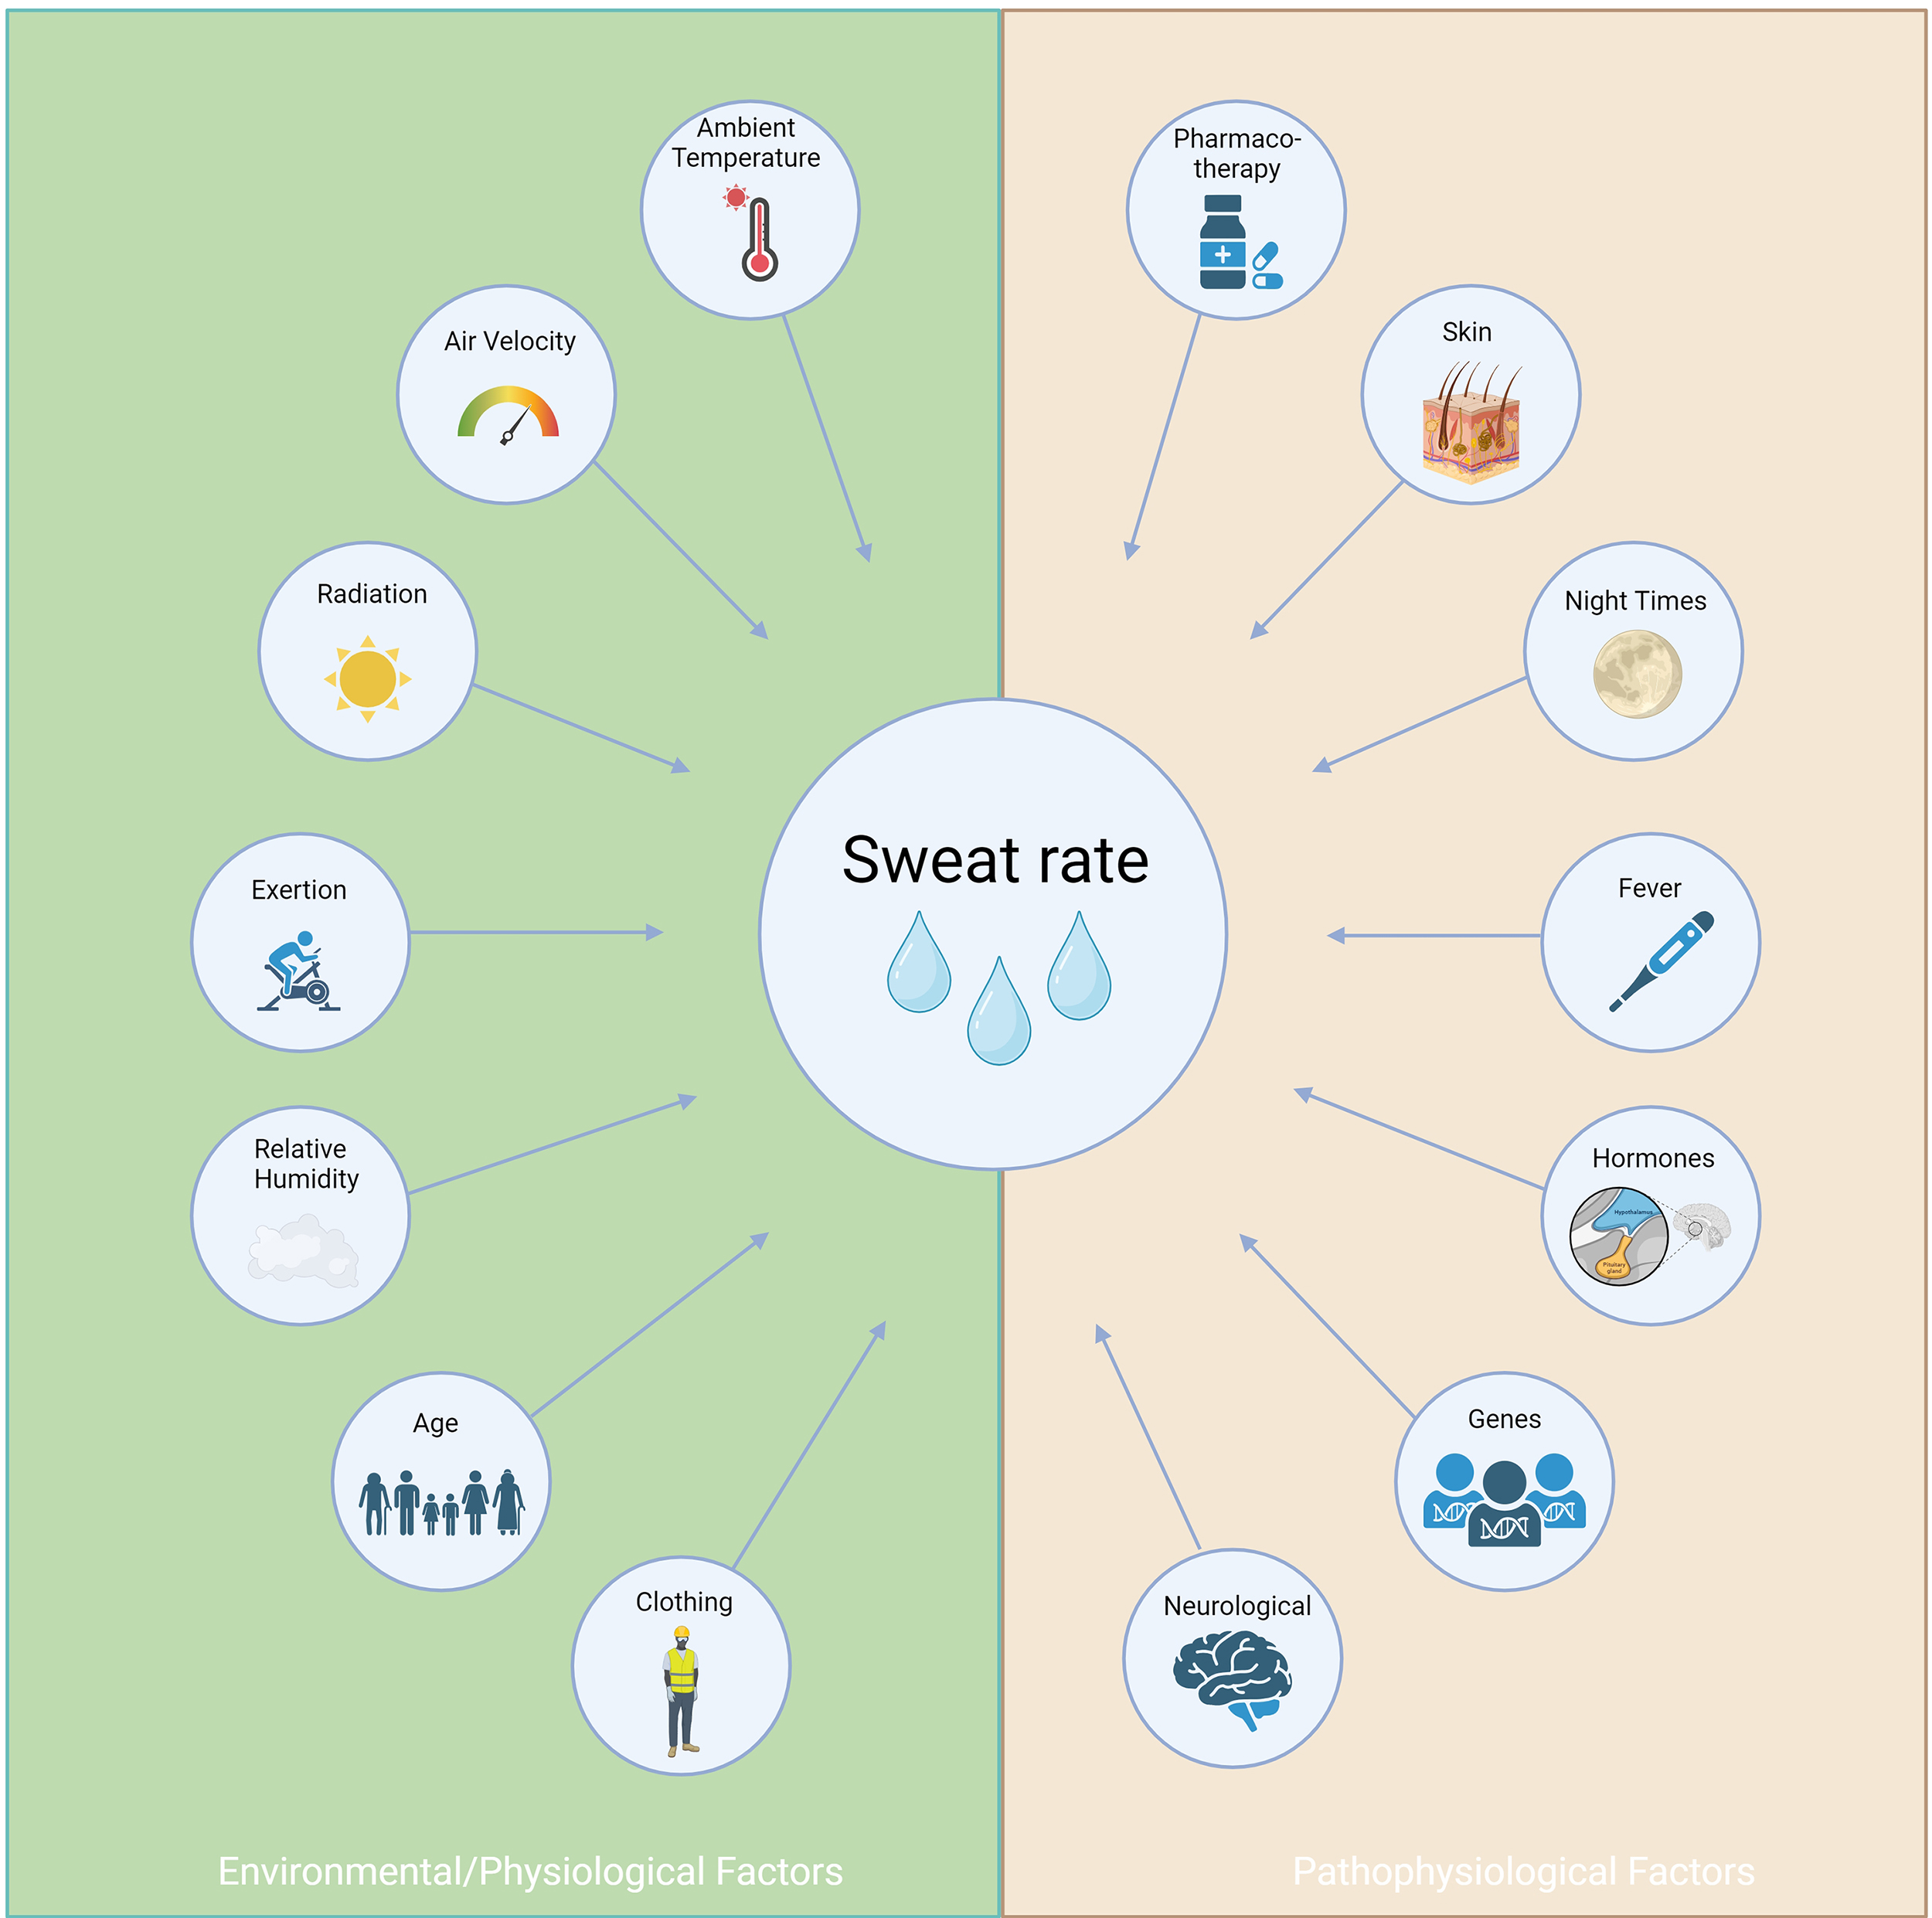 The sweat rate as a digital biomarker in clinical medicine beyond sports science